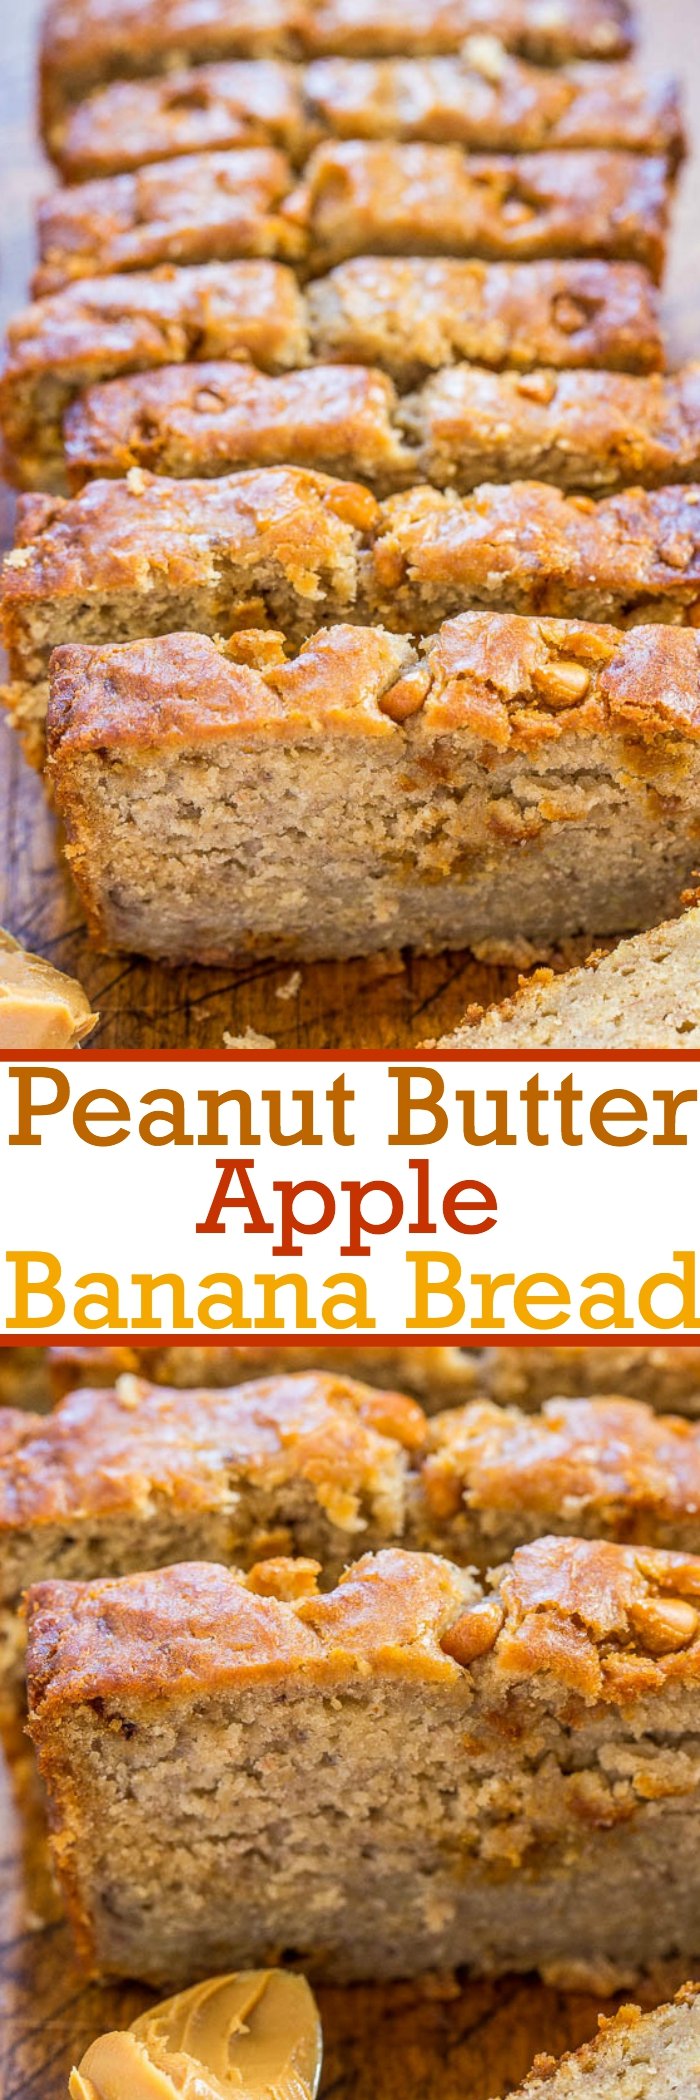 Peanut Butter Apple Banana Bread - Jazz up regular banana bread with peanut butter and apples! A perfect combo that tastes amazing together!! Fast, easy, no mixer required, and a hit with everyone!